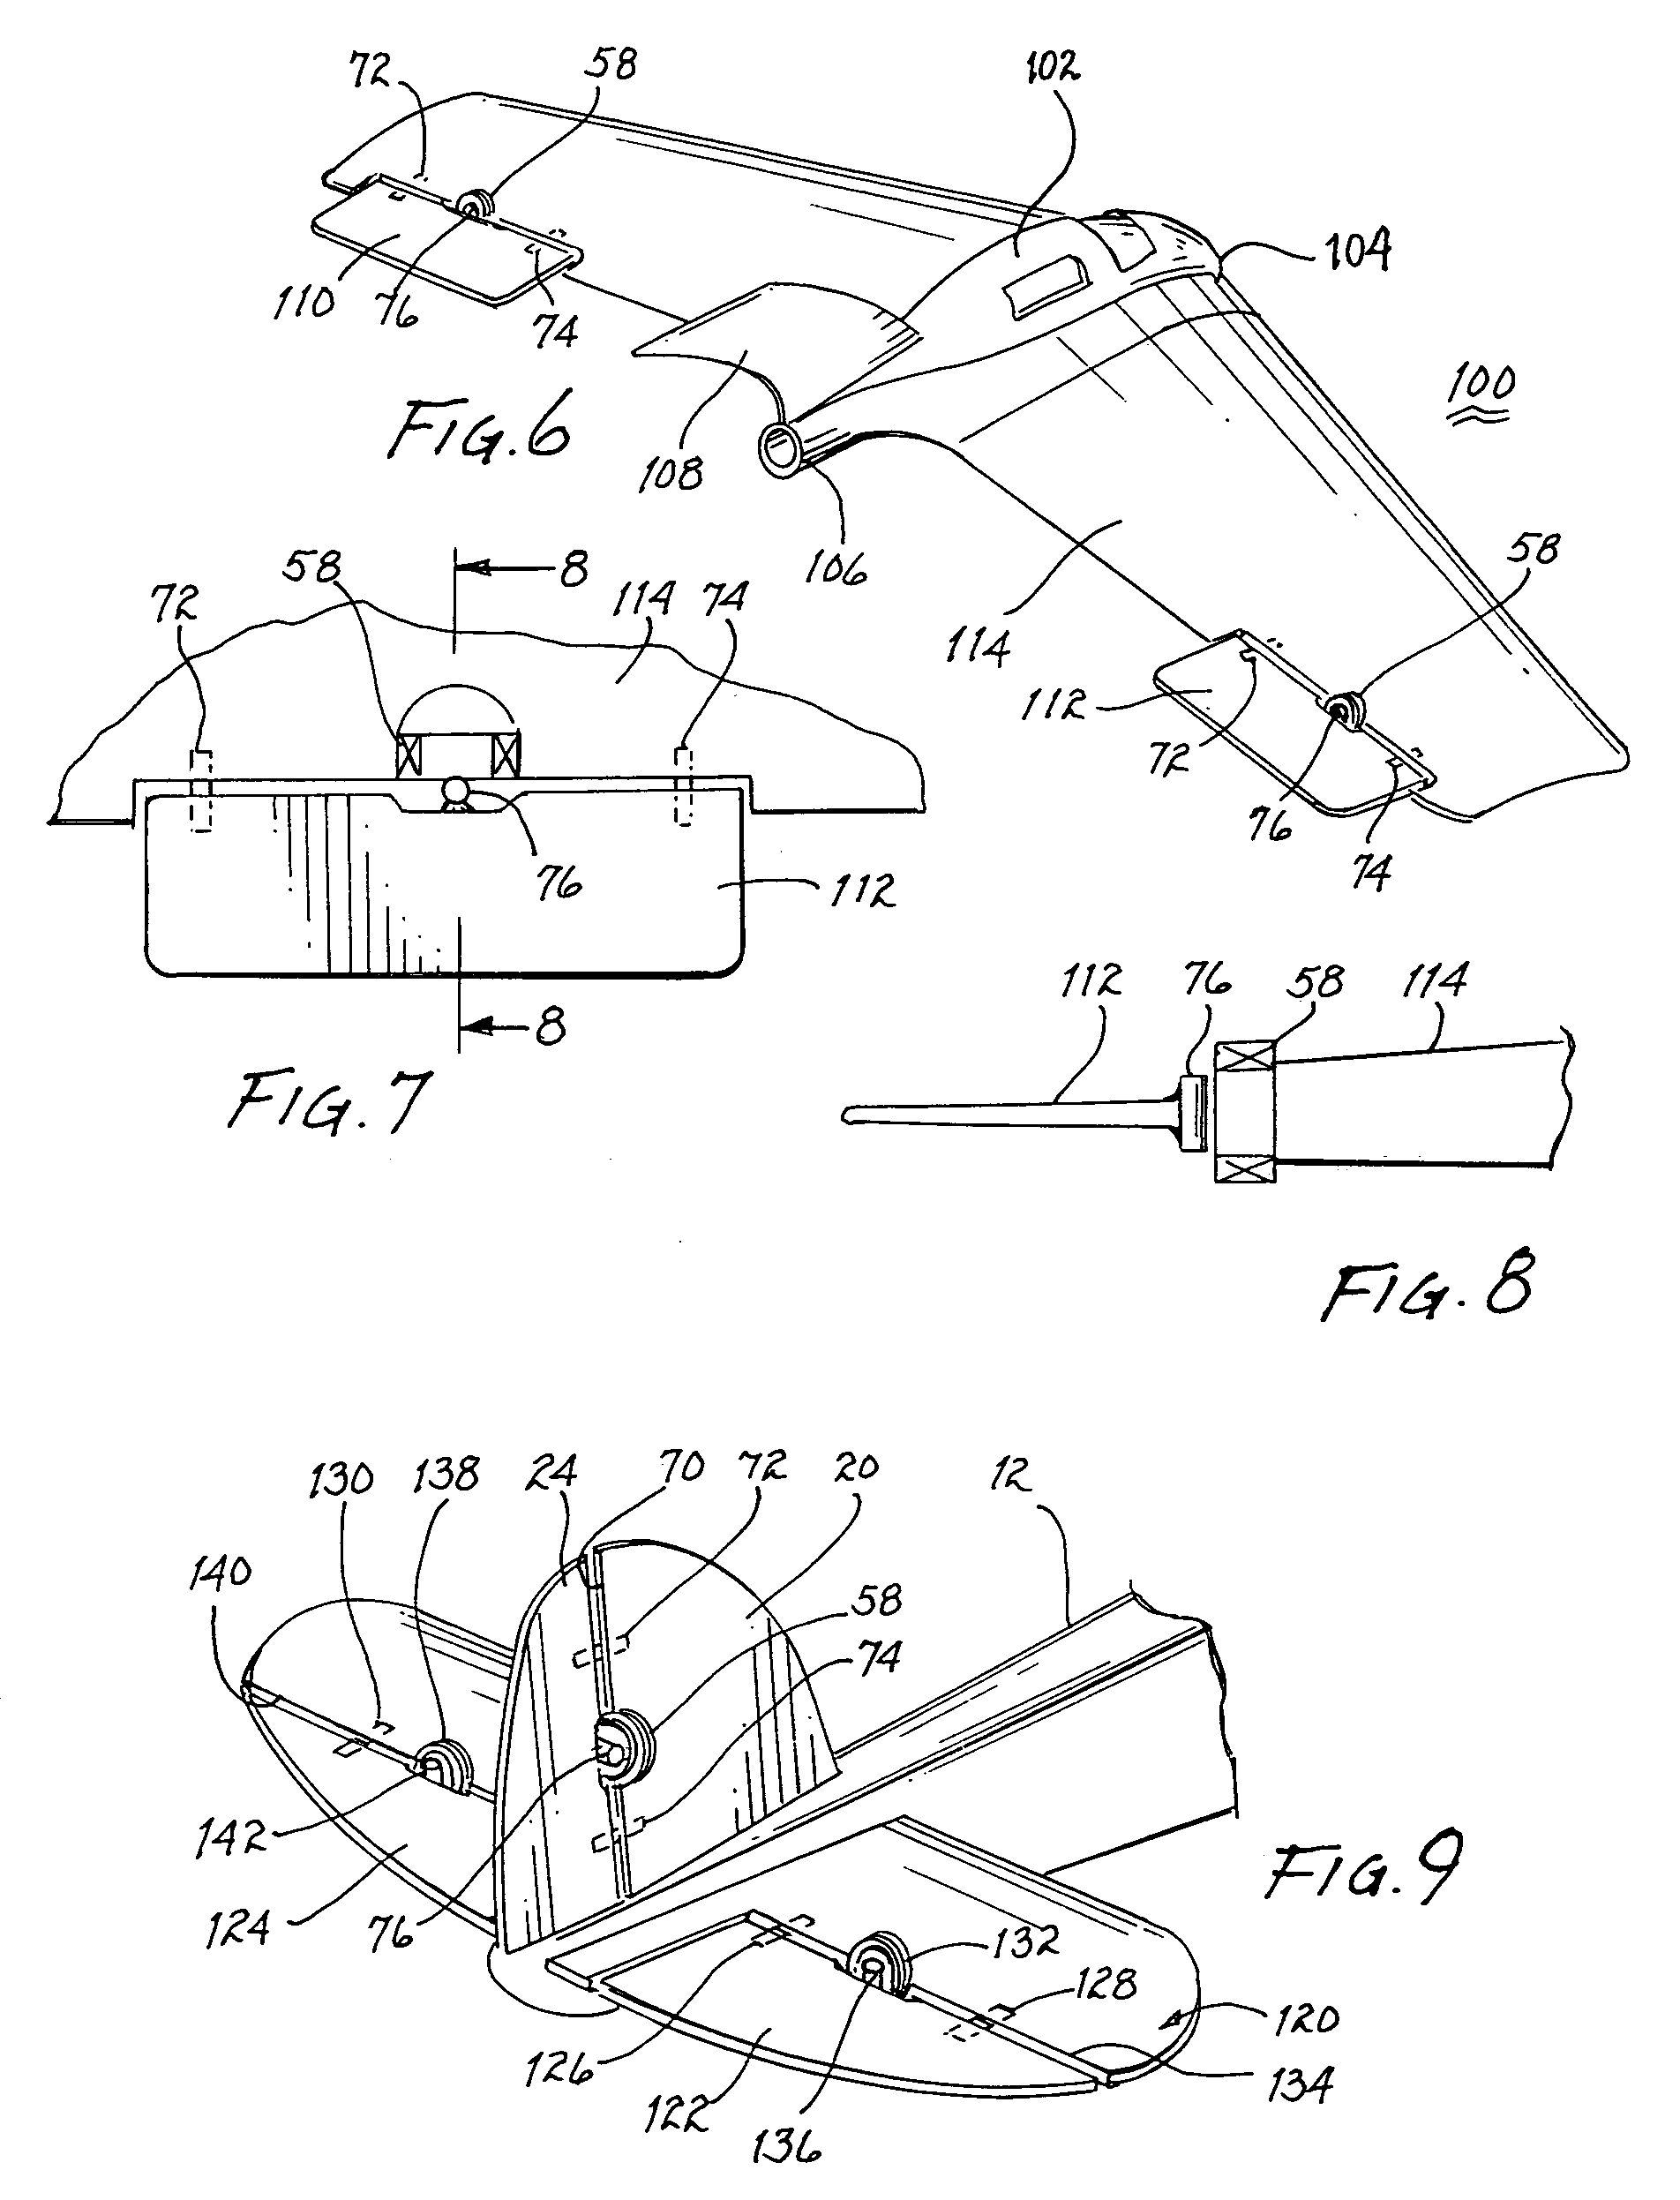 Remotely controlled model airplane having deflectable centrally biased control surface